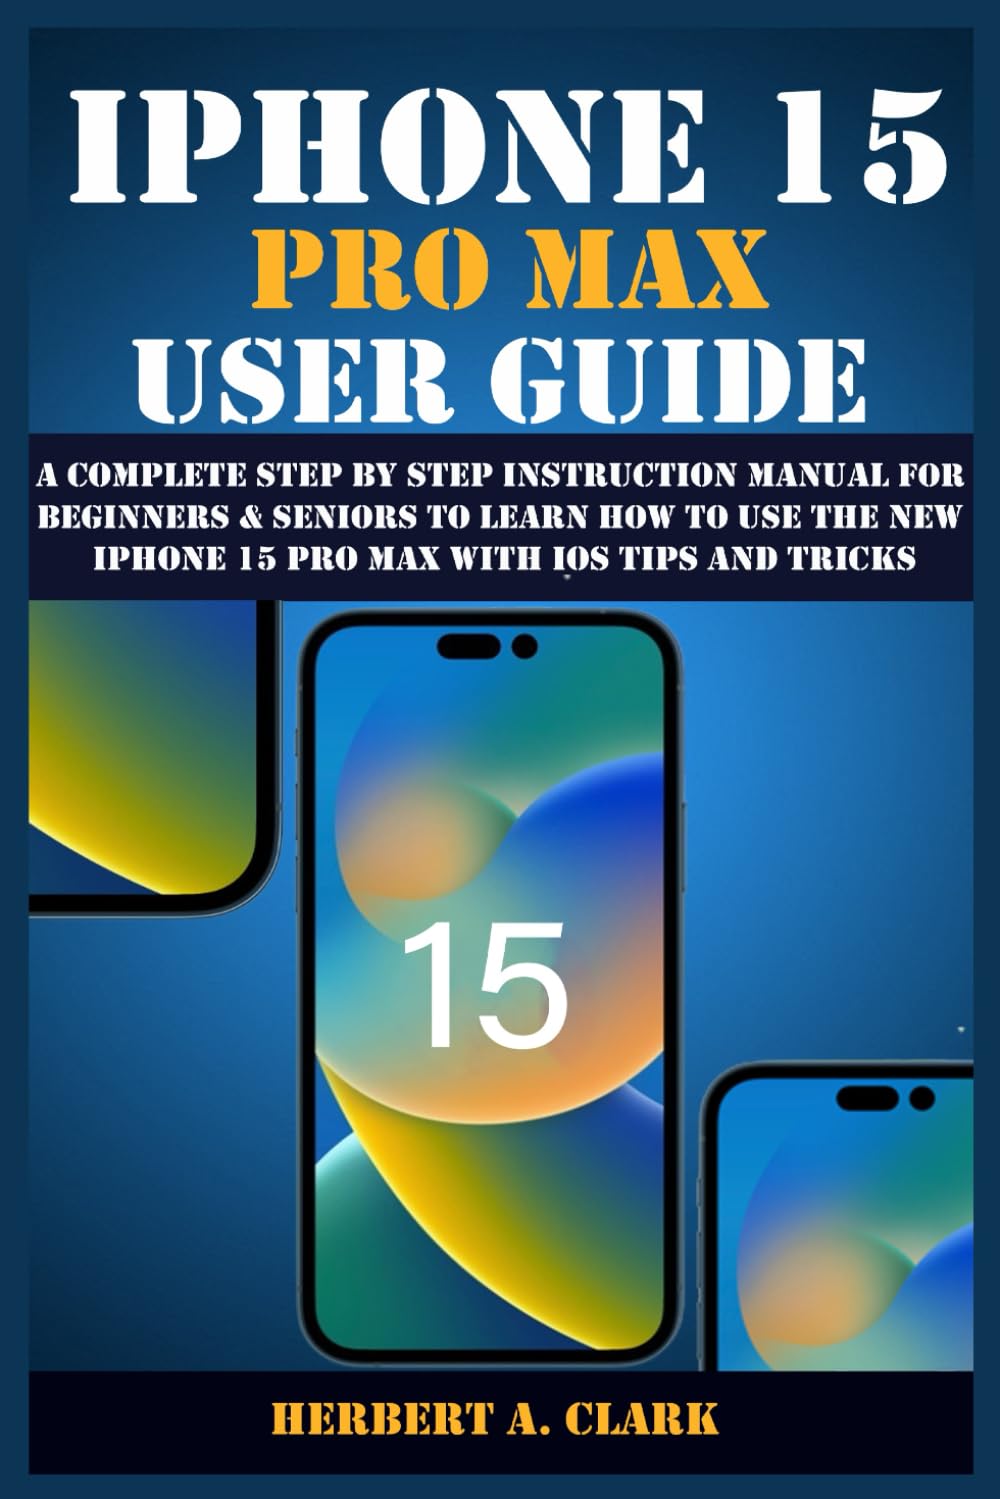 IPHONE 15 PRO MAX USER GUIDE: A Complete Step By Step Instruction Manual for Beginners & Seniors to Learn How to Use the New iPhone 15 Pro Max With iOS Tips and Tricks (Apple Device Manuals by Clark)